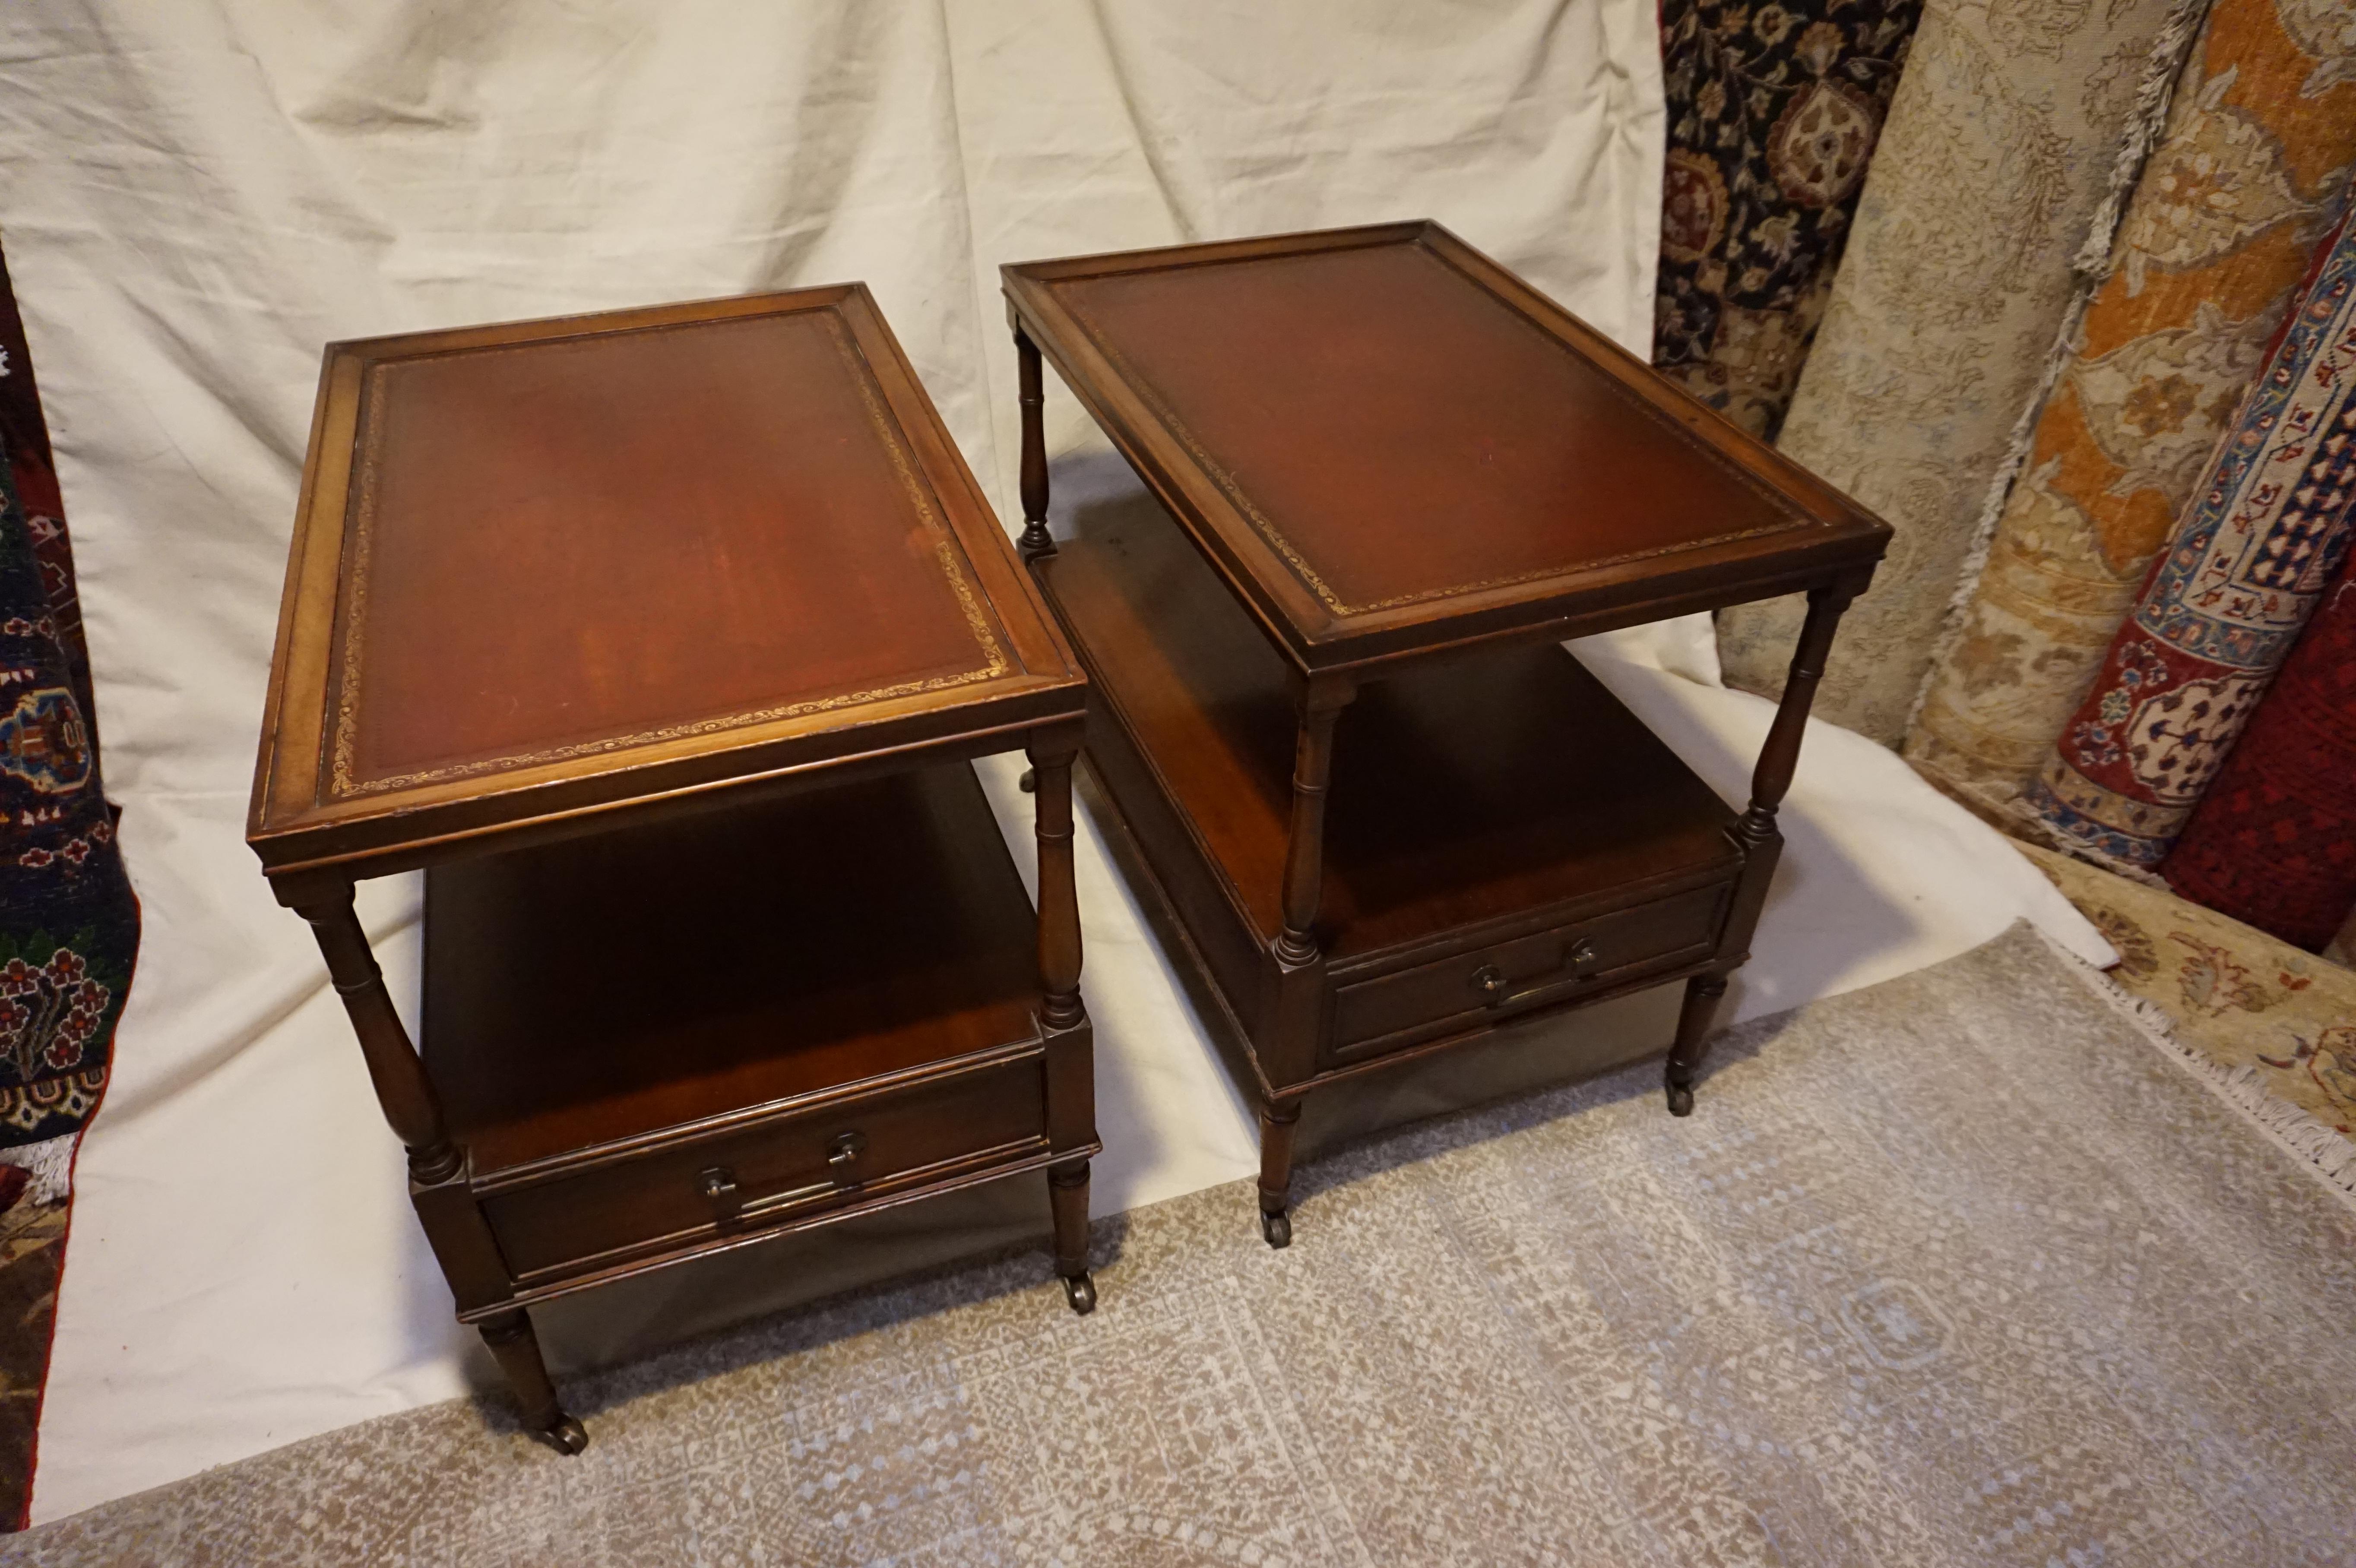 Solid mahogany handcrafted American Colonial Style side tables with gilt leather tops and single drawers and shelves. Original brass hardware including brass casters. Good sturdy condition with the character of age. Some wear visible consistent with